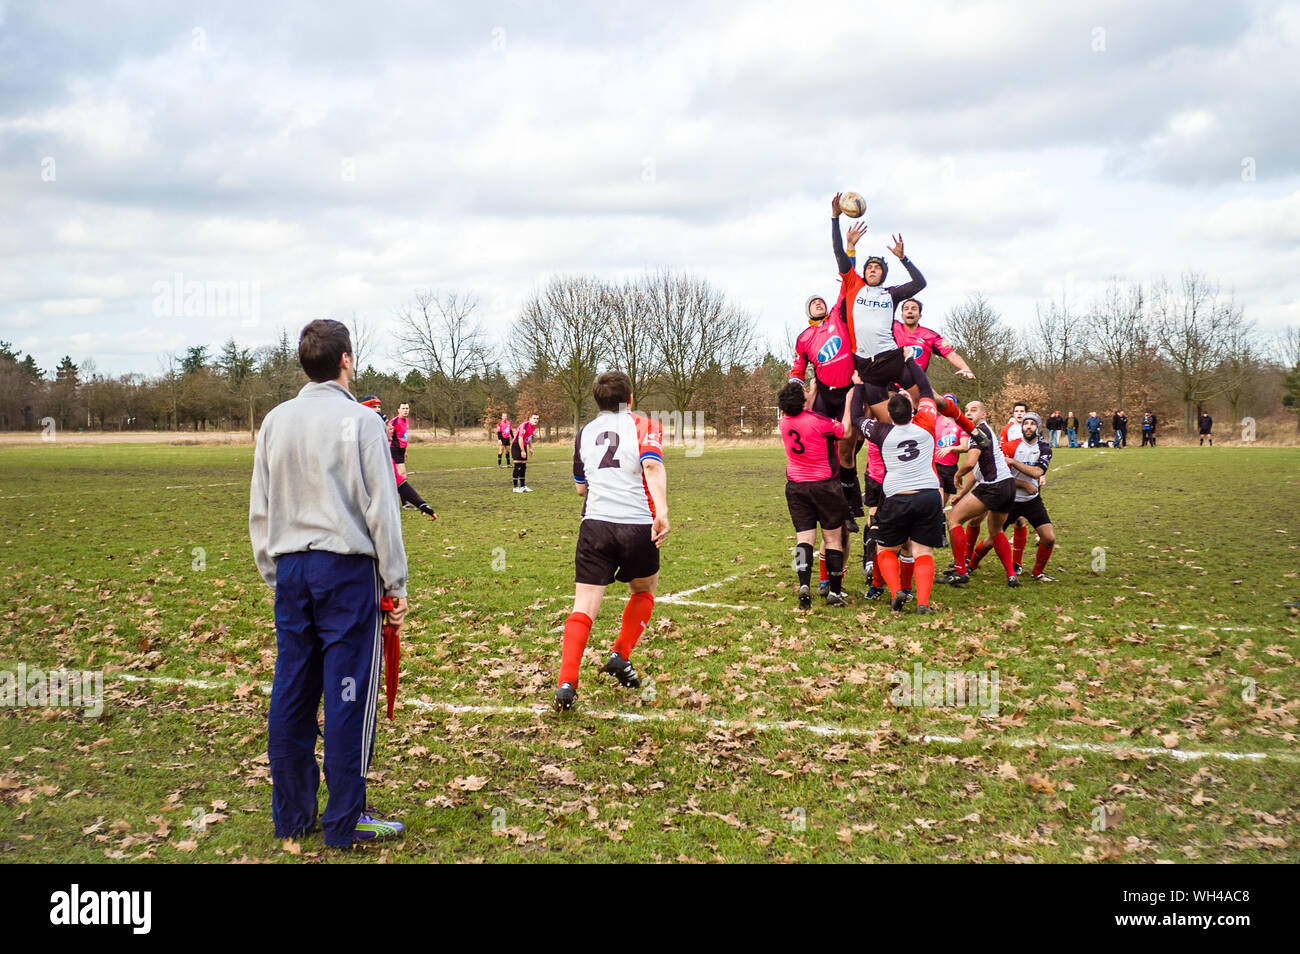 A line-out during an amateur men's rugby match in the Bois de Vincennes in Paris, France, by a cloudy winter sunday. Stock Photo